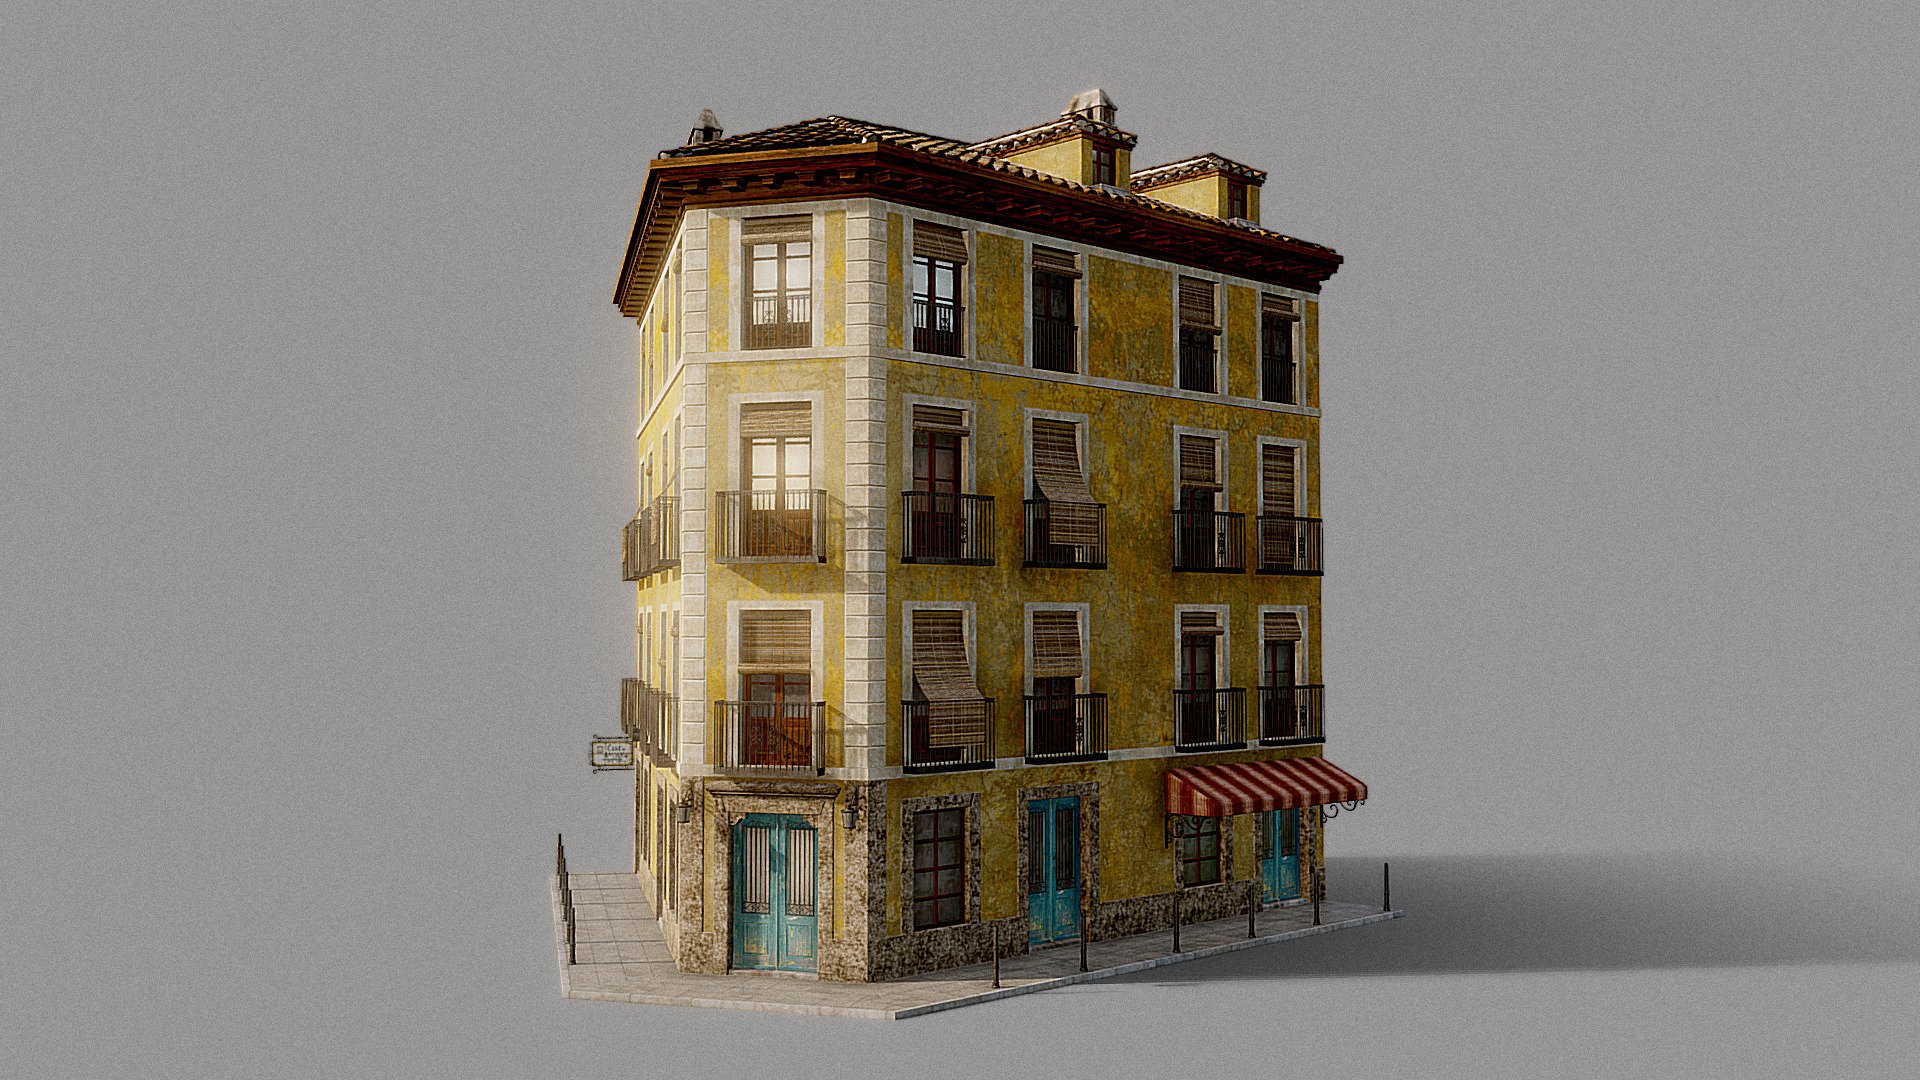 This Old spanish house is a high end, photorealistic 3D model, that is created to help you add the realism to your project.

The model is suitable for any visual production - broadcast, high-res film close-ups, advertising, games, design visualization, forensic presentation, animated movie production, still illustration etc.

Model has real world scale, clean optimized topology 3d model